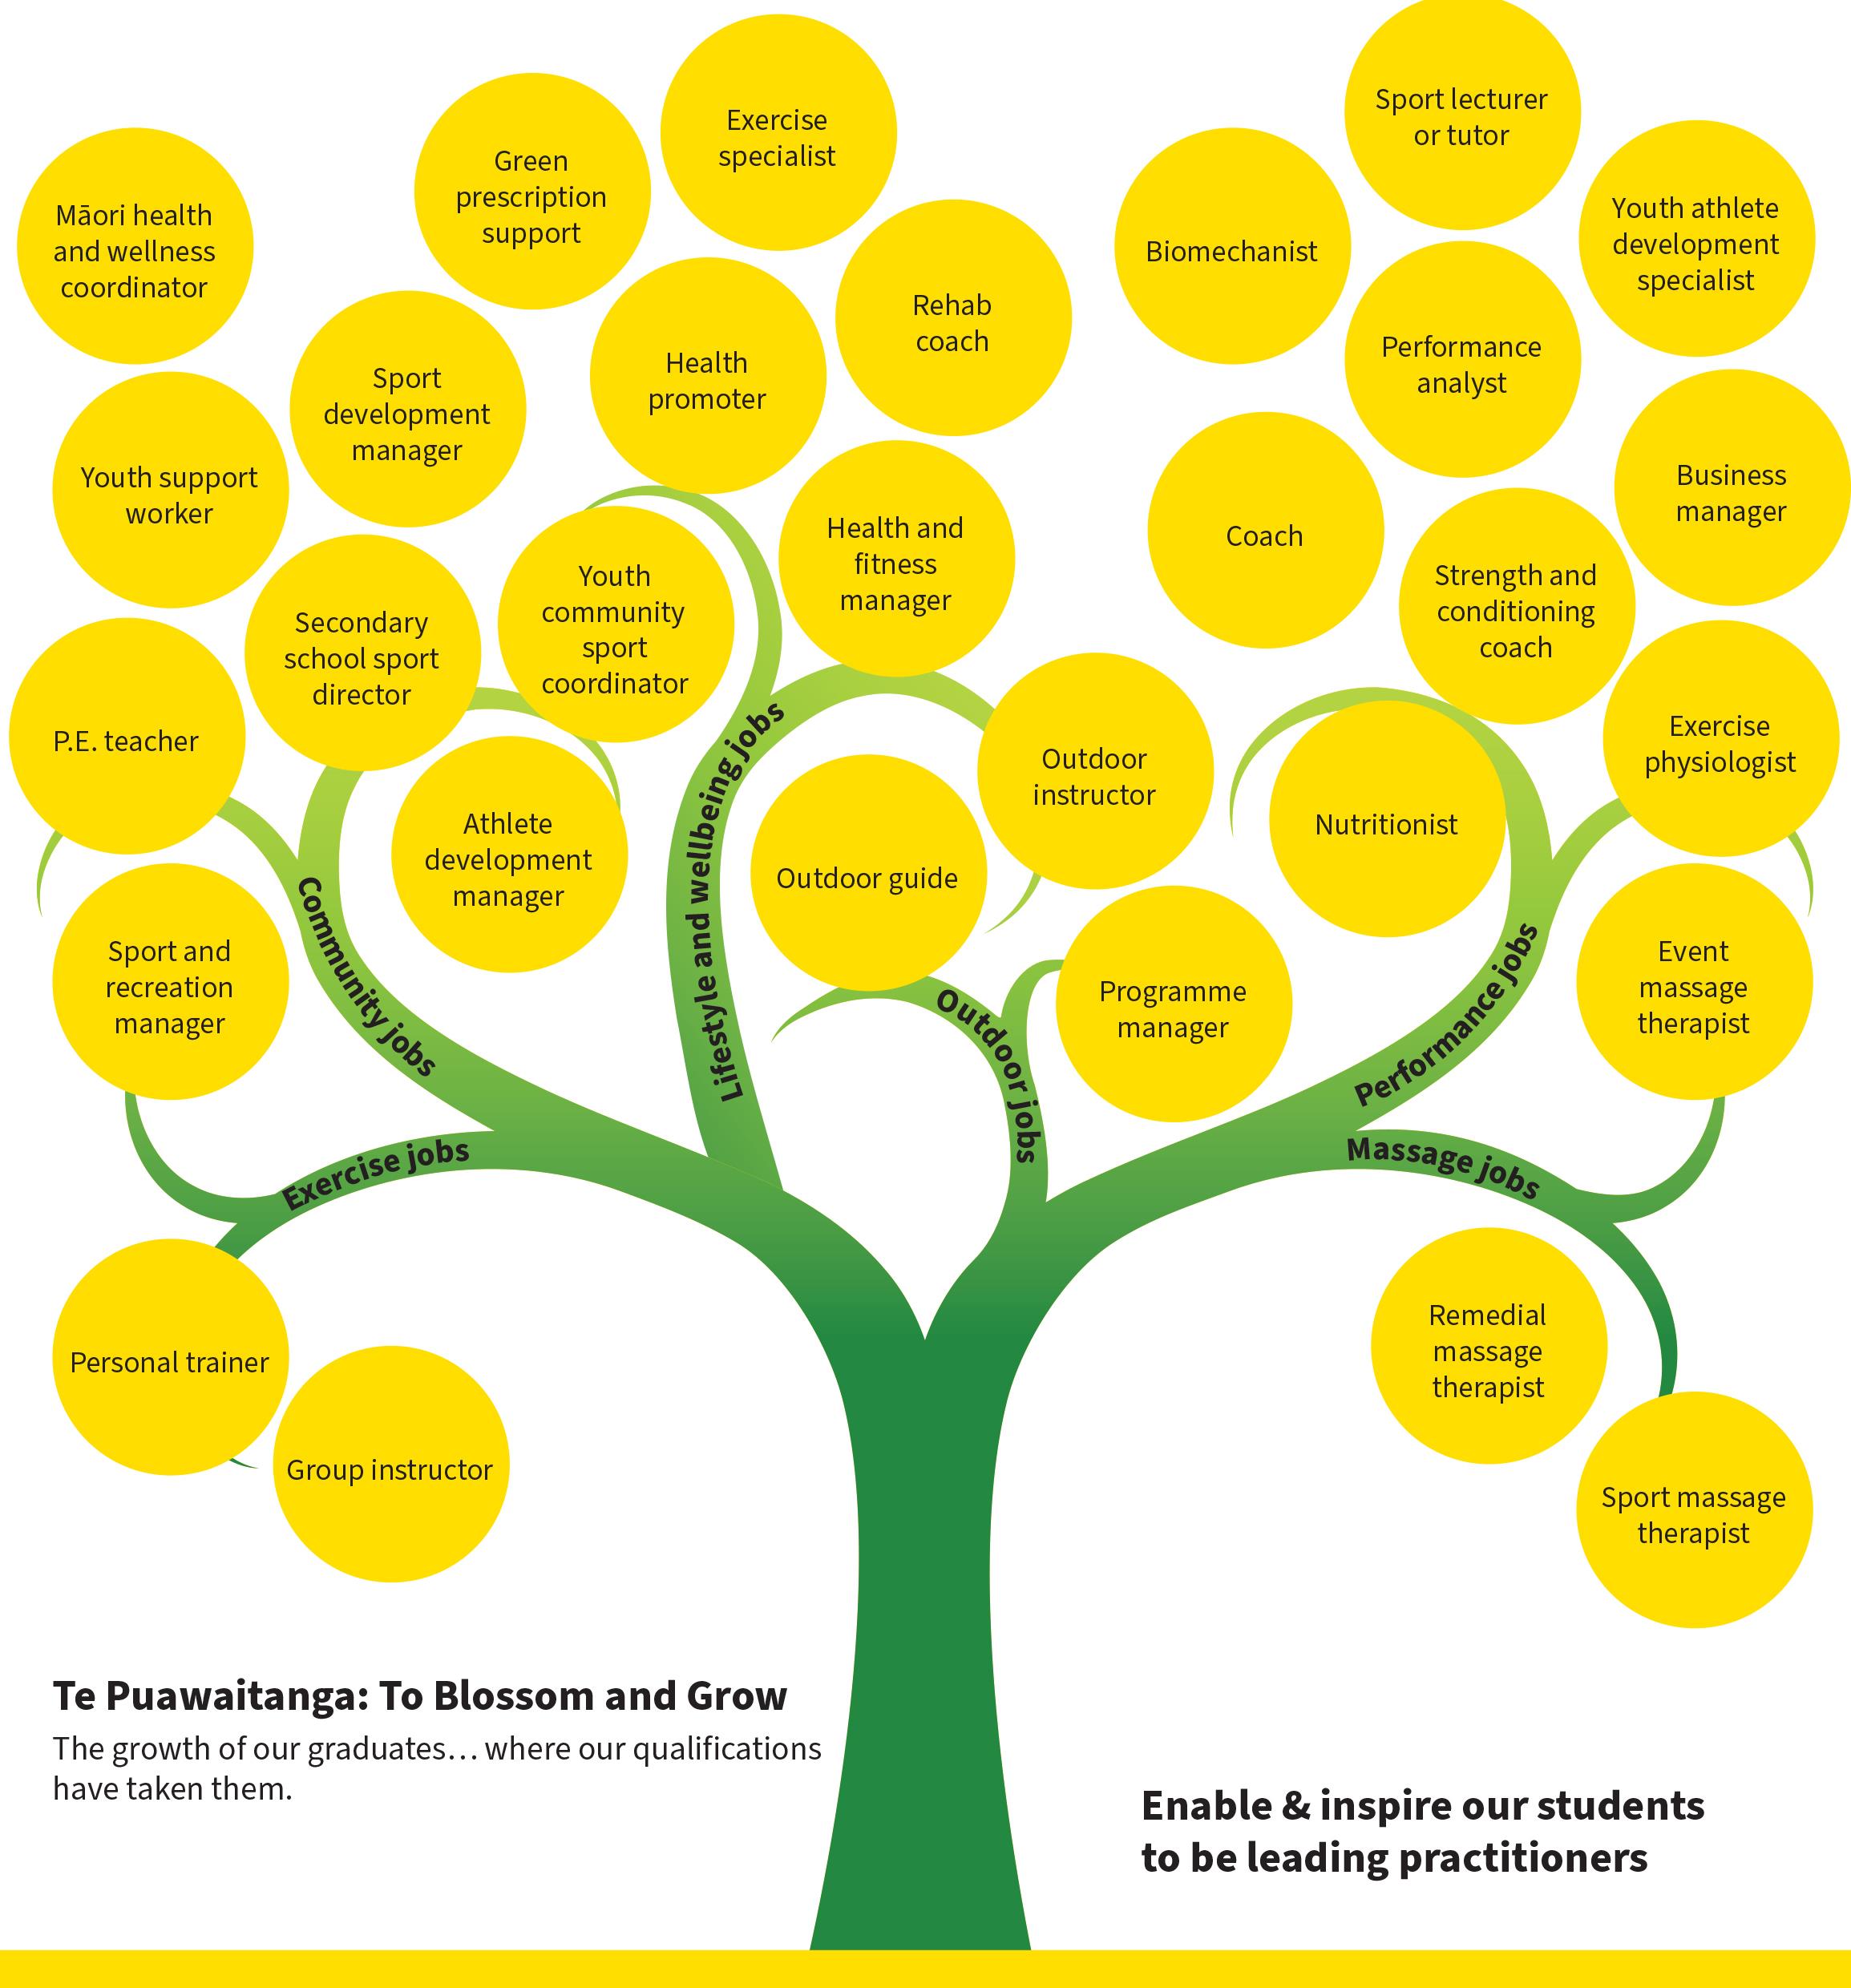 Graduate Sport Tree representing different employment opportunities in the field of sport science